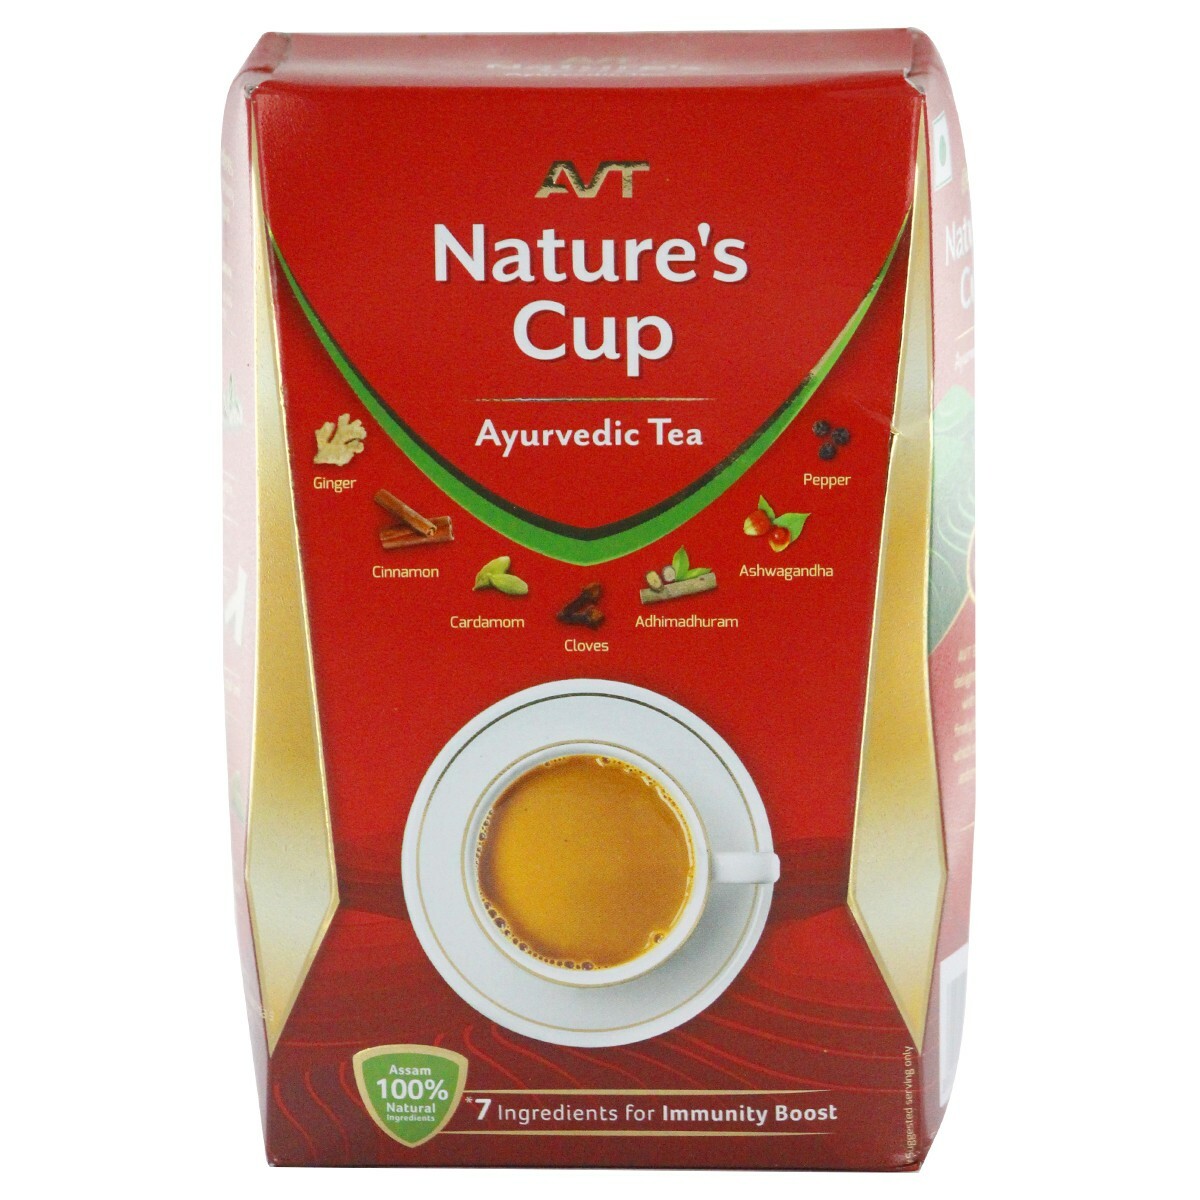 AVT Nature's Cup-250gm